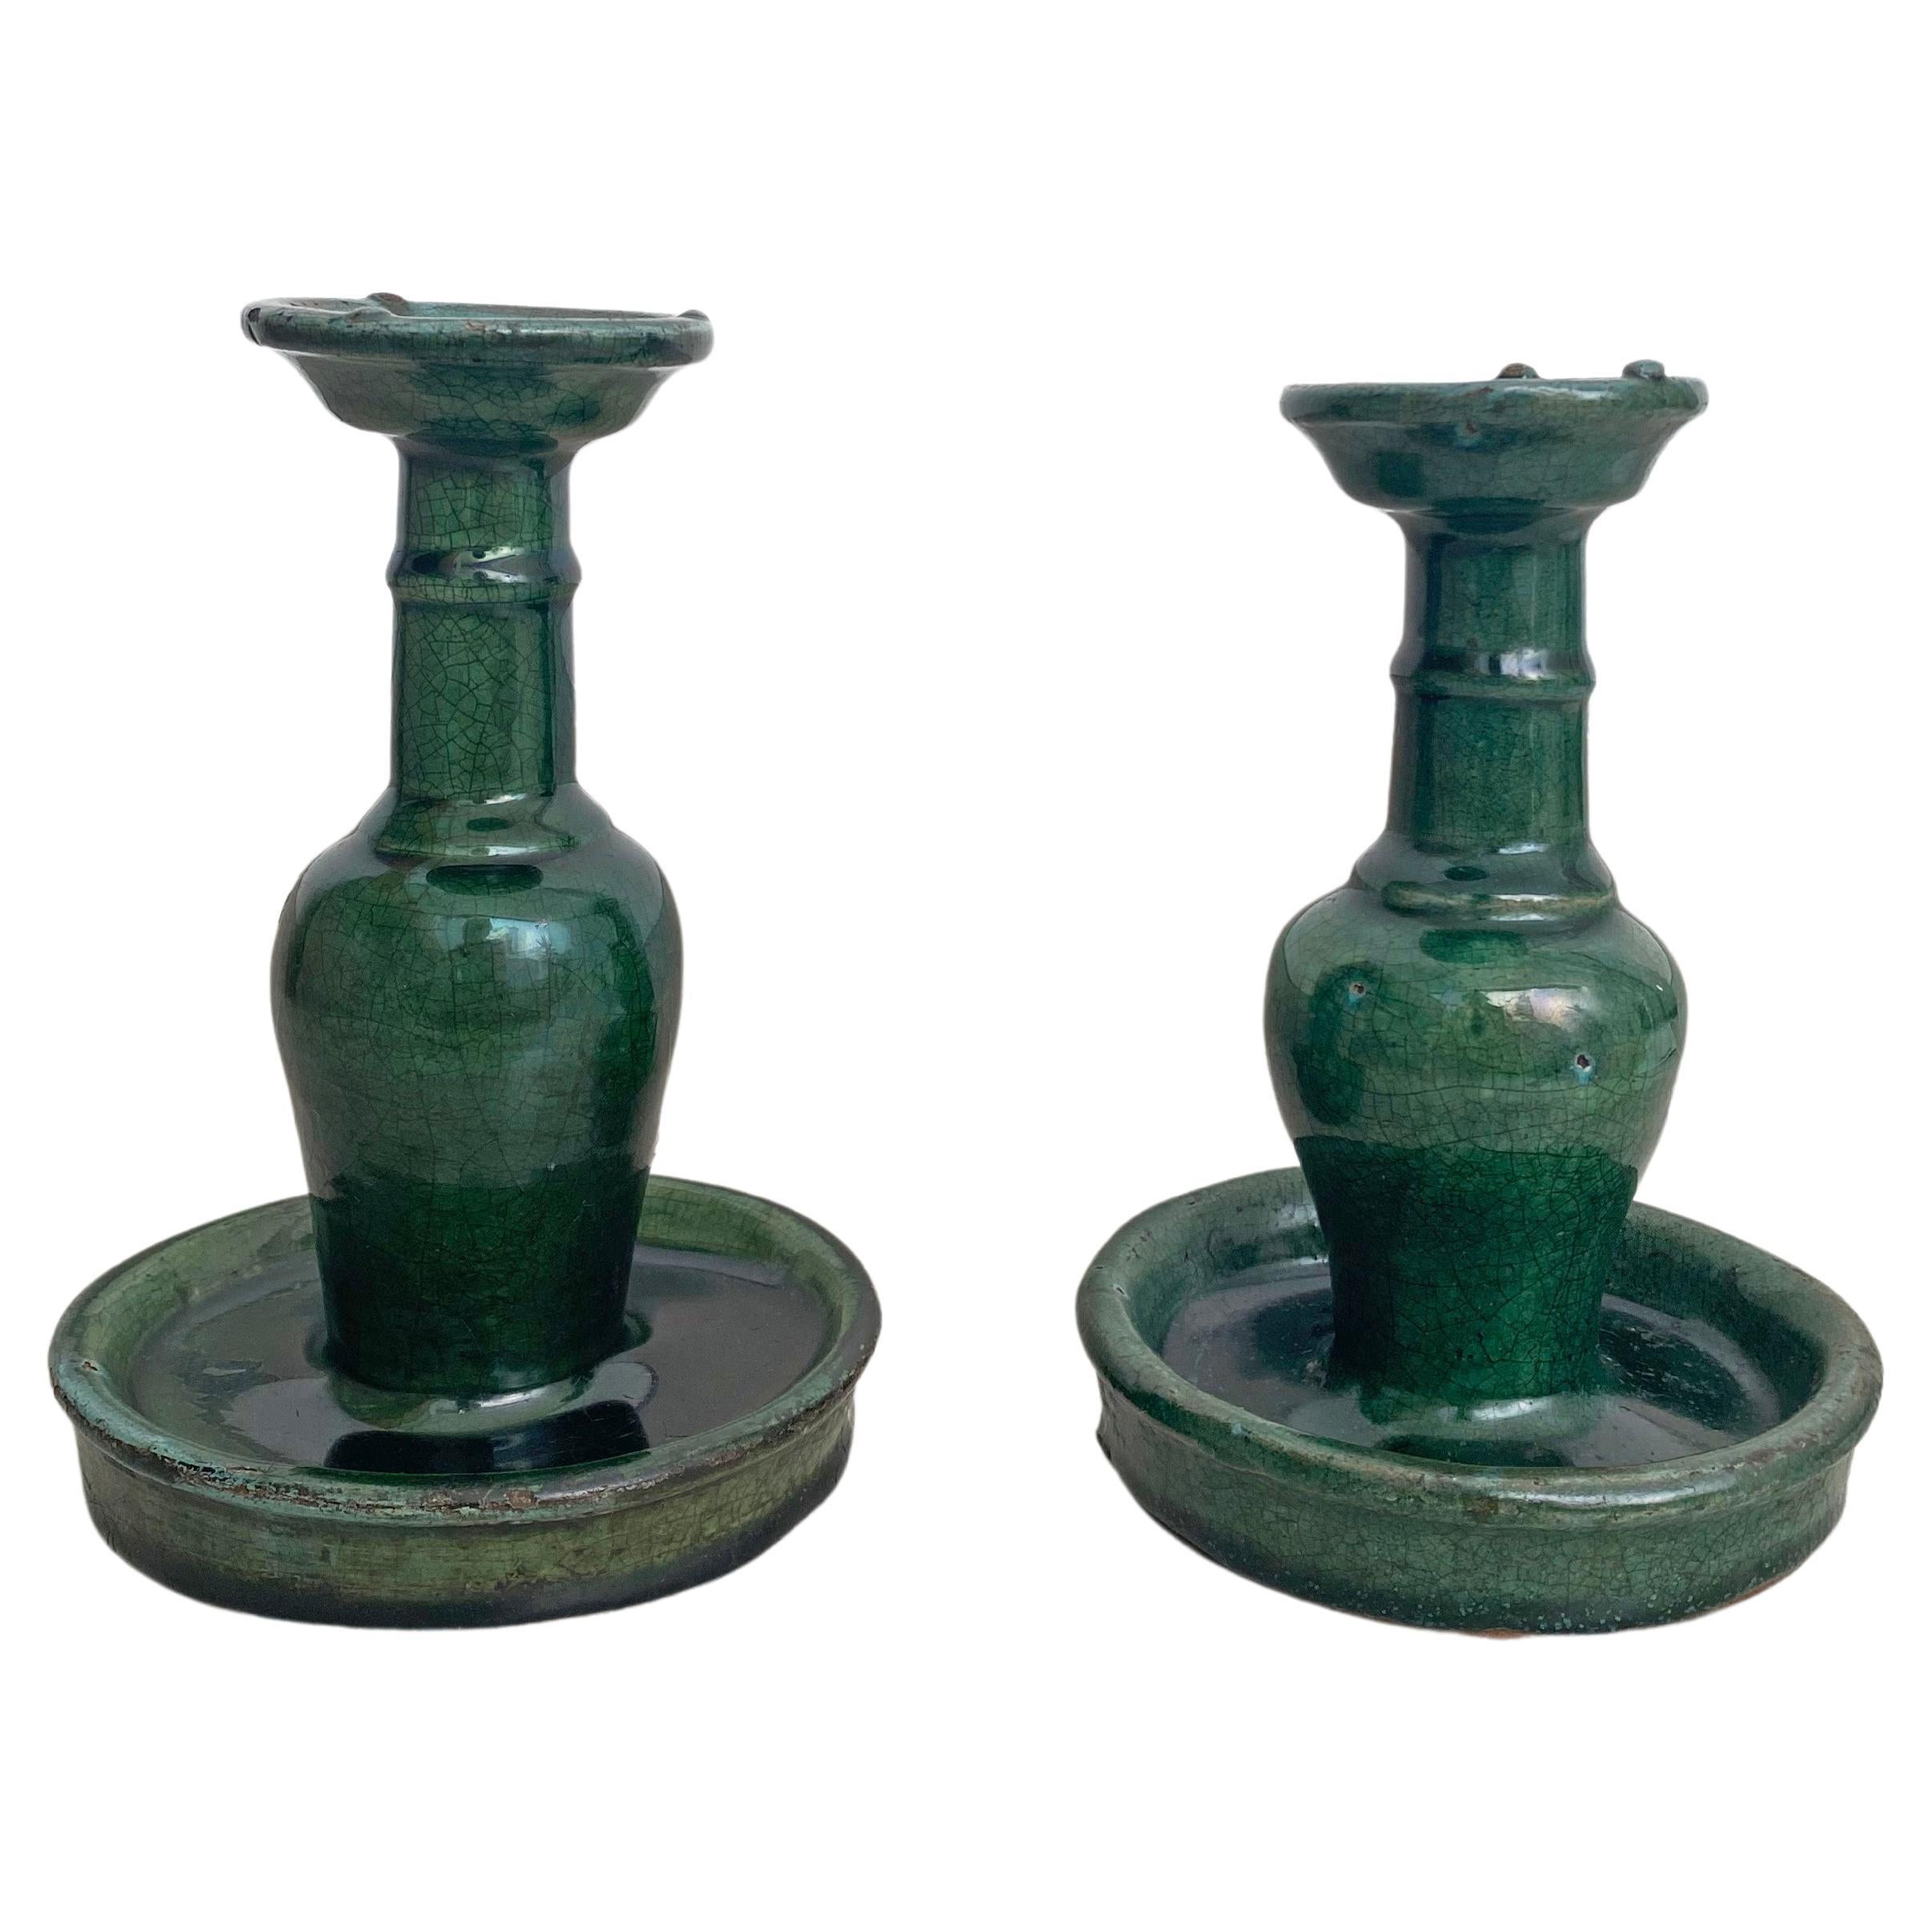 Chinese 'Shiwan' Candleholder / Oil Lamp Set, Green-Glazed Early 20th Century